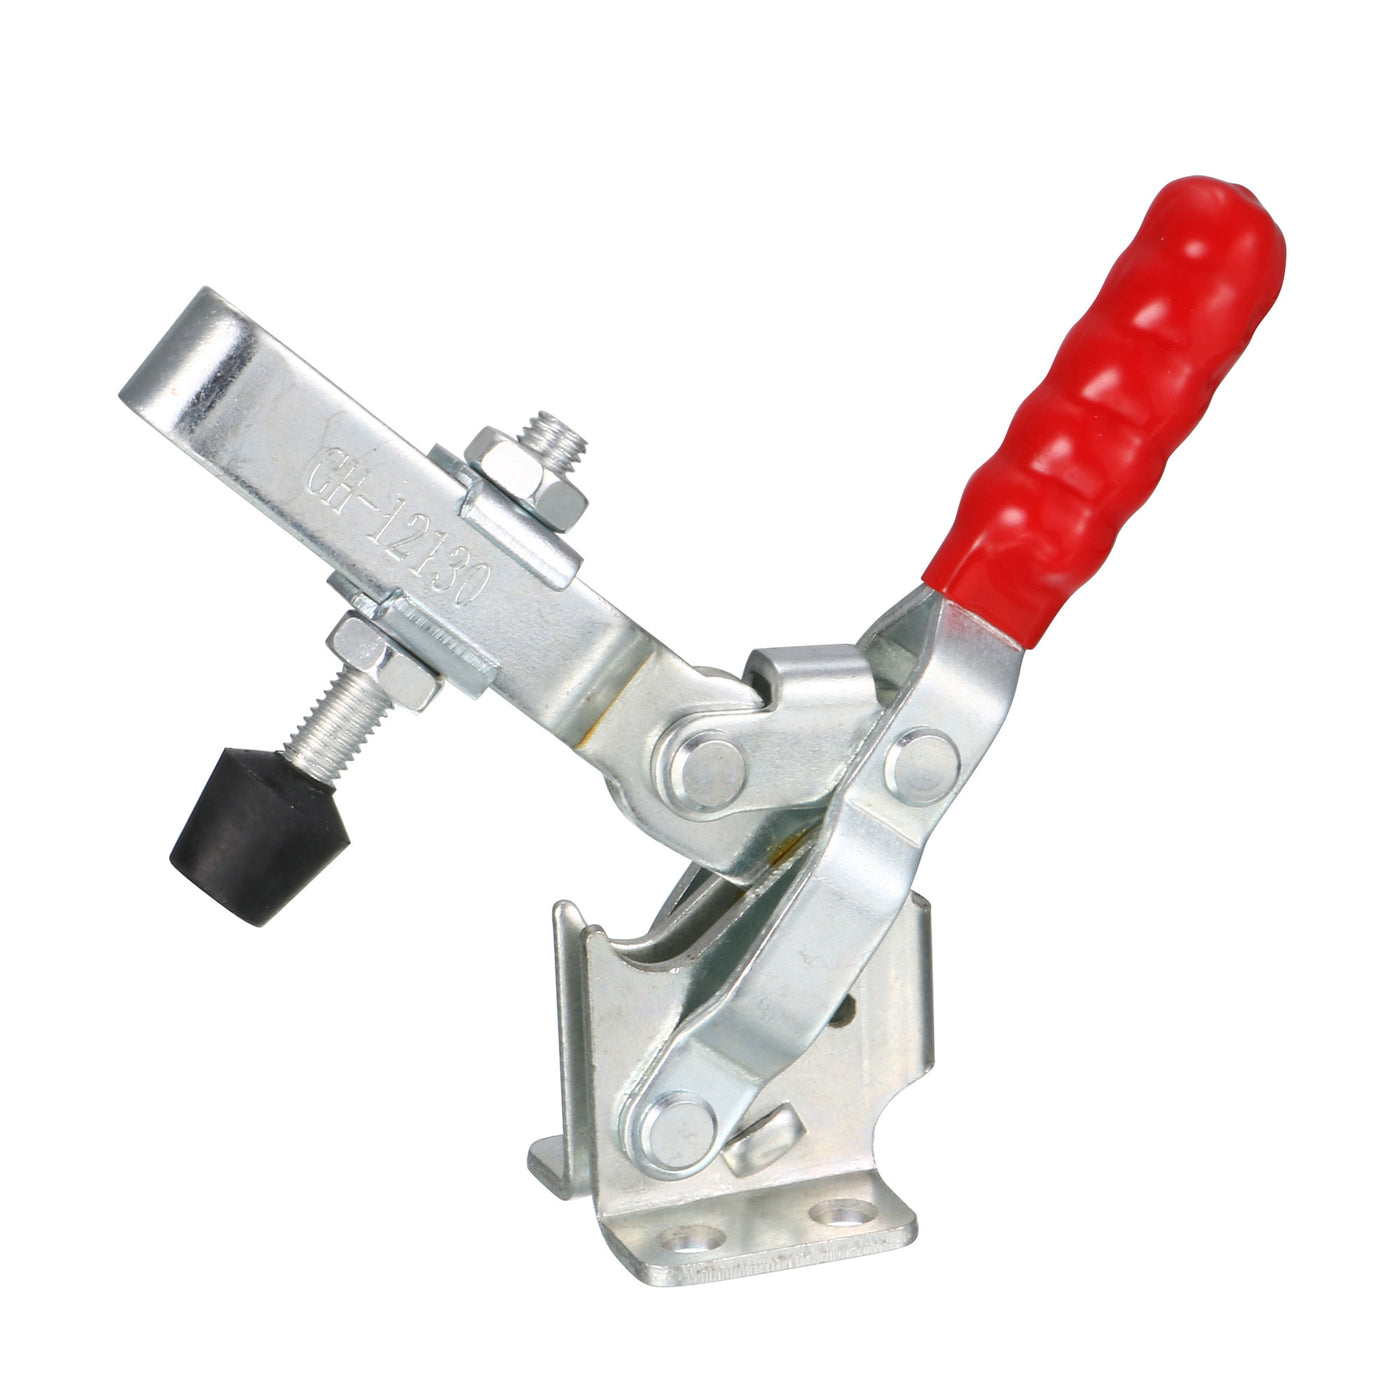 uxcell Uxcell Hand Tool Vertical Toggle Clamp Quick-Release Clamp 500 lbs/227kg